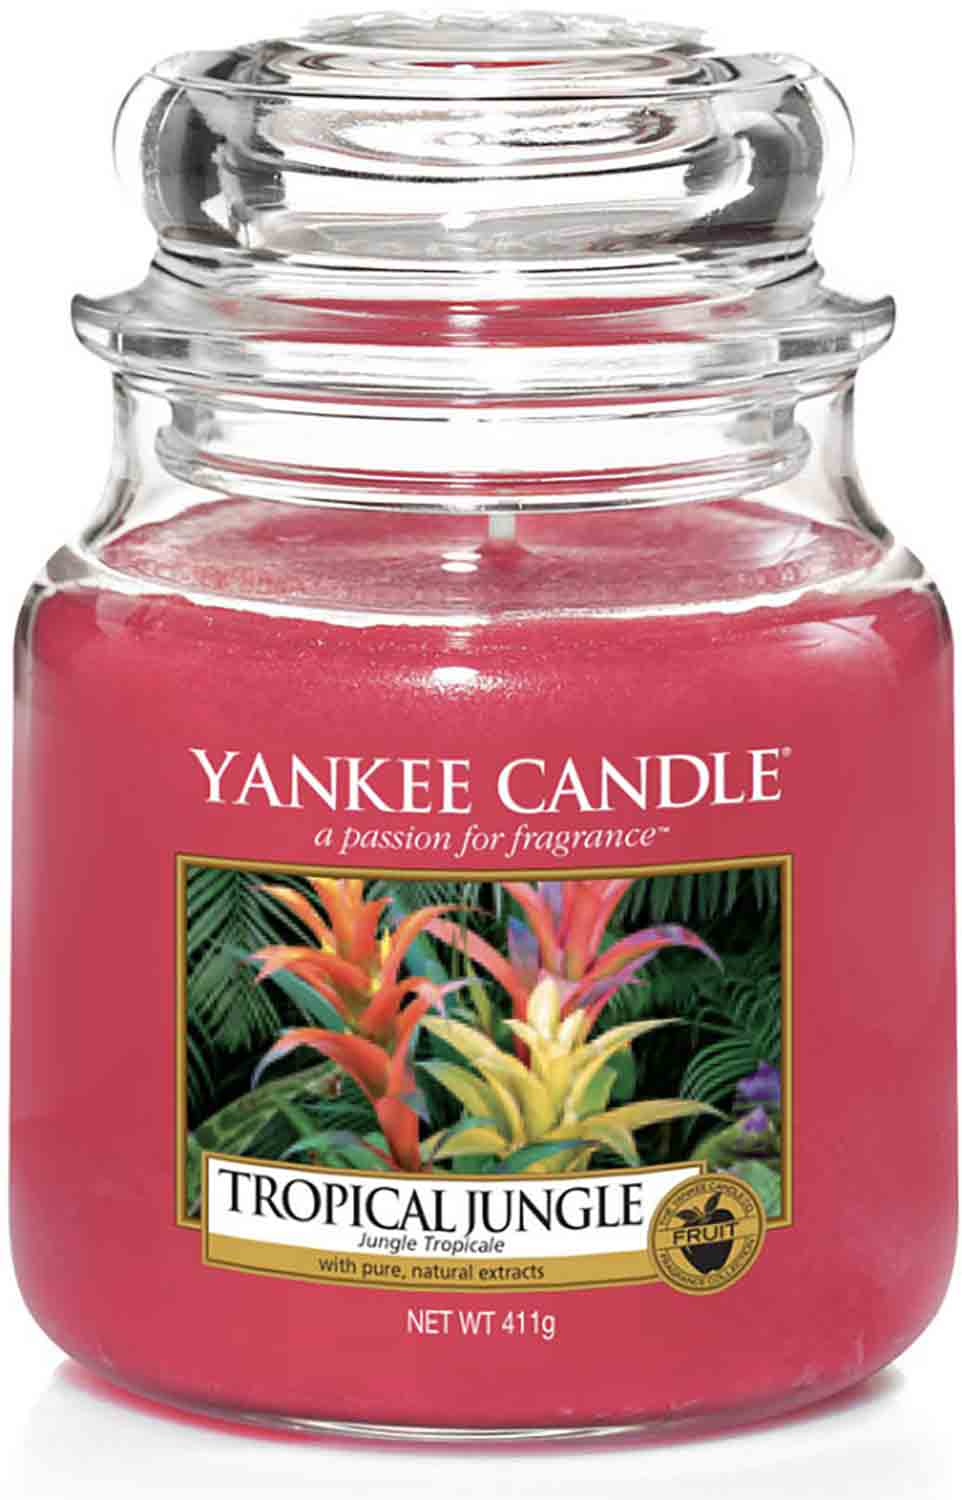 Yankee Candle Tropical Jungle 411g Assorted